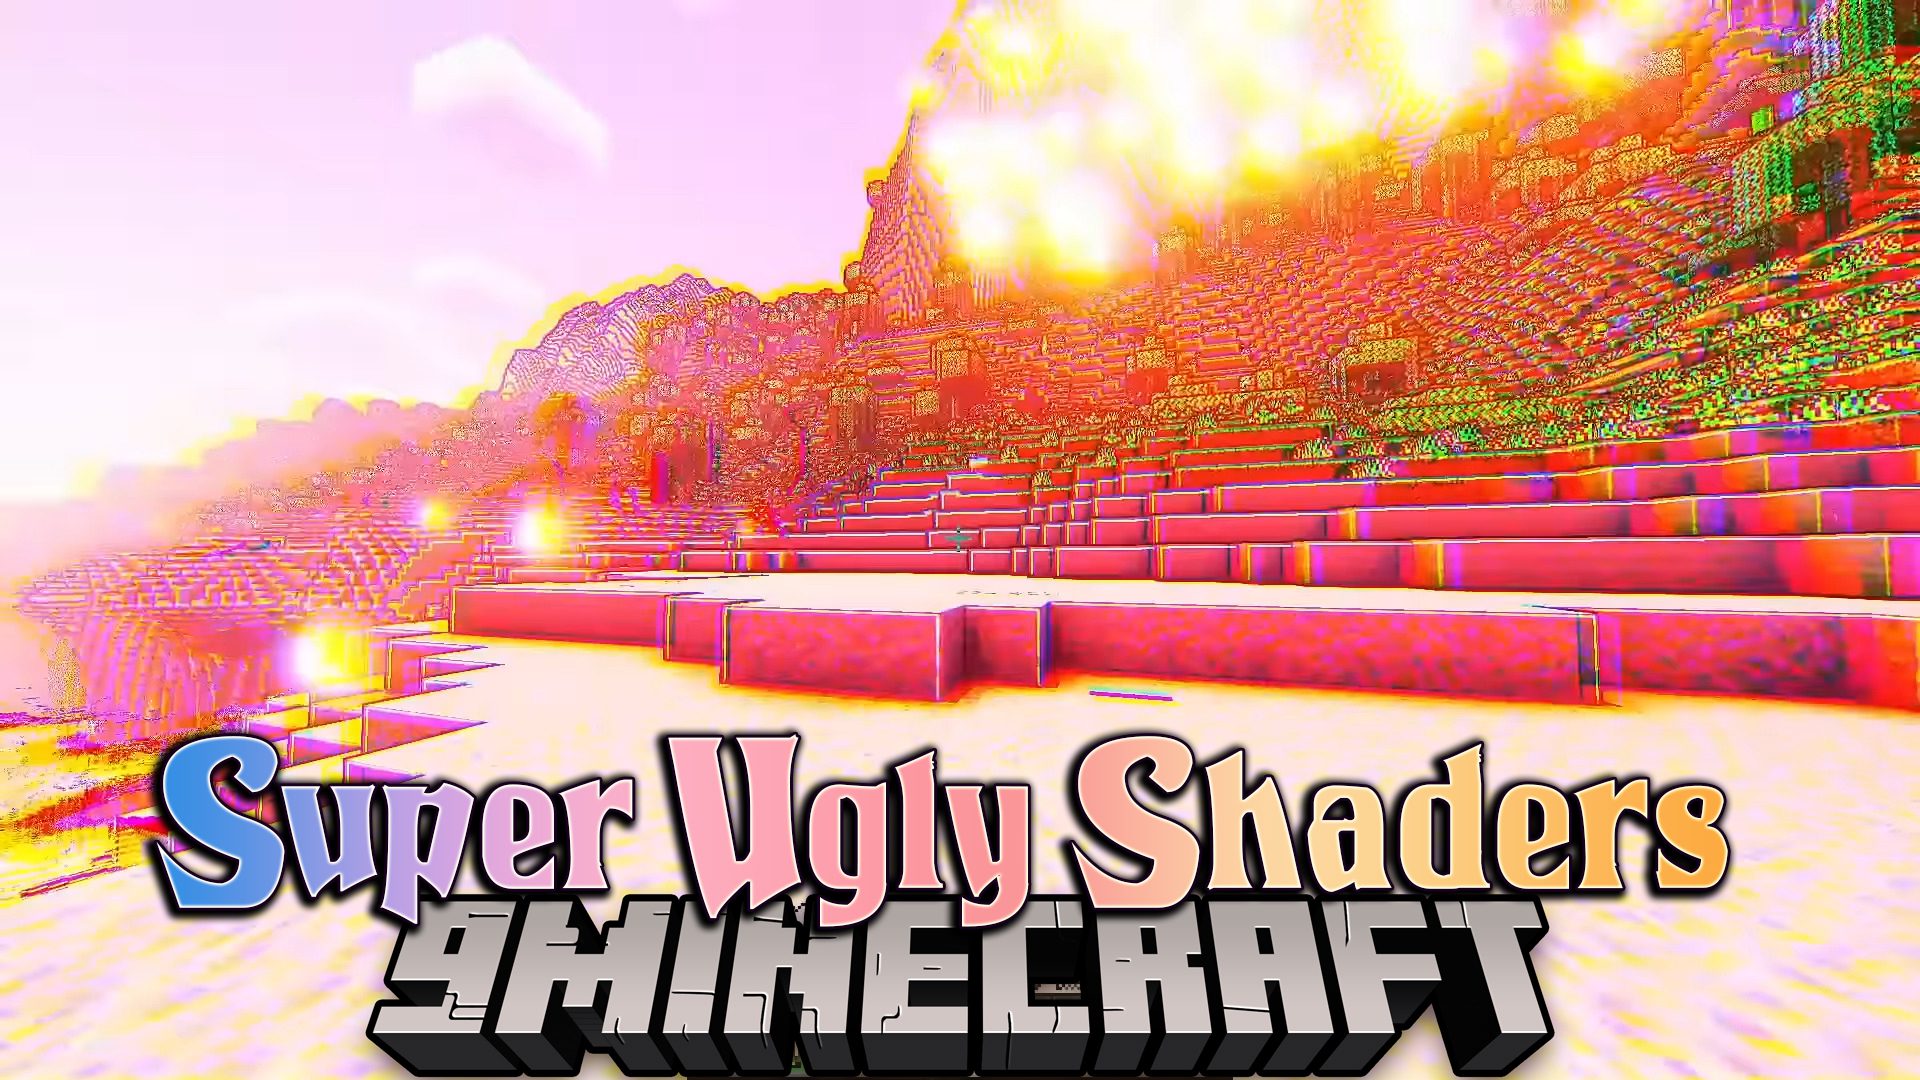 Super Ugly Shaders (1.20.4, 1.19.4) - Shaderpack Causes Hallucinations and Dizziness 1